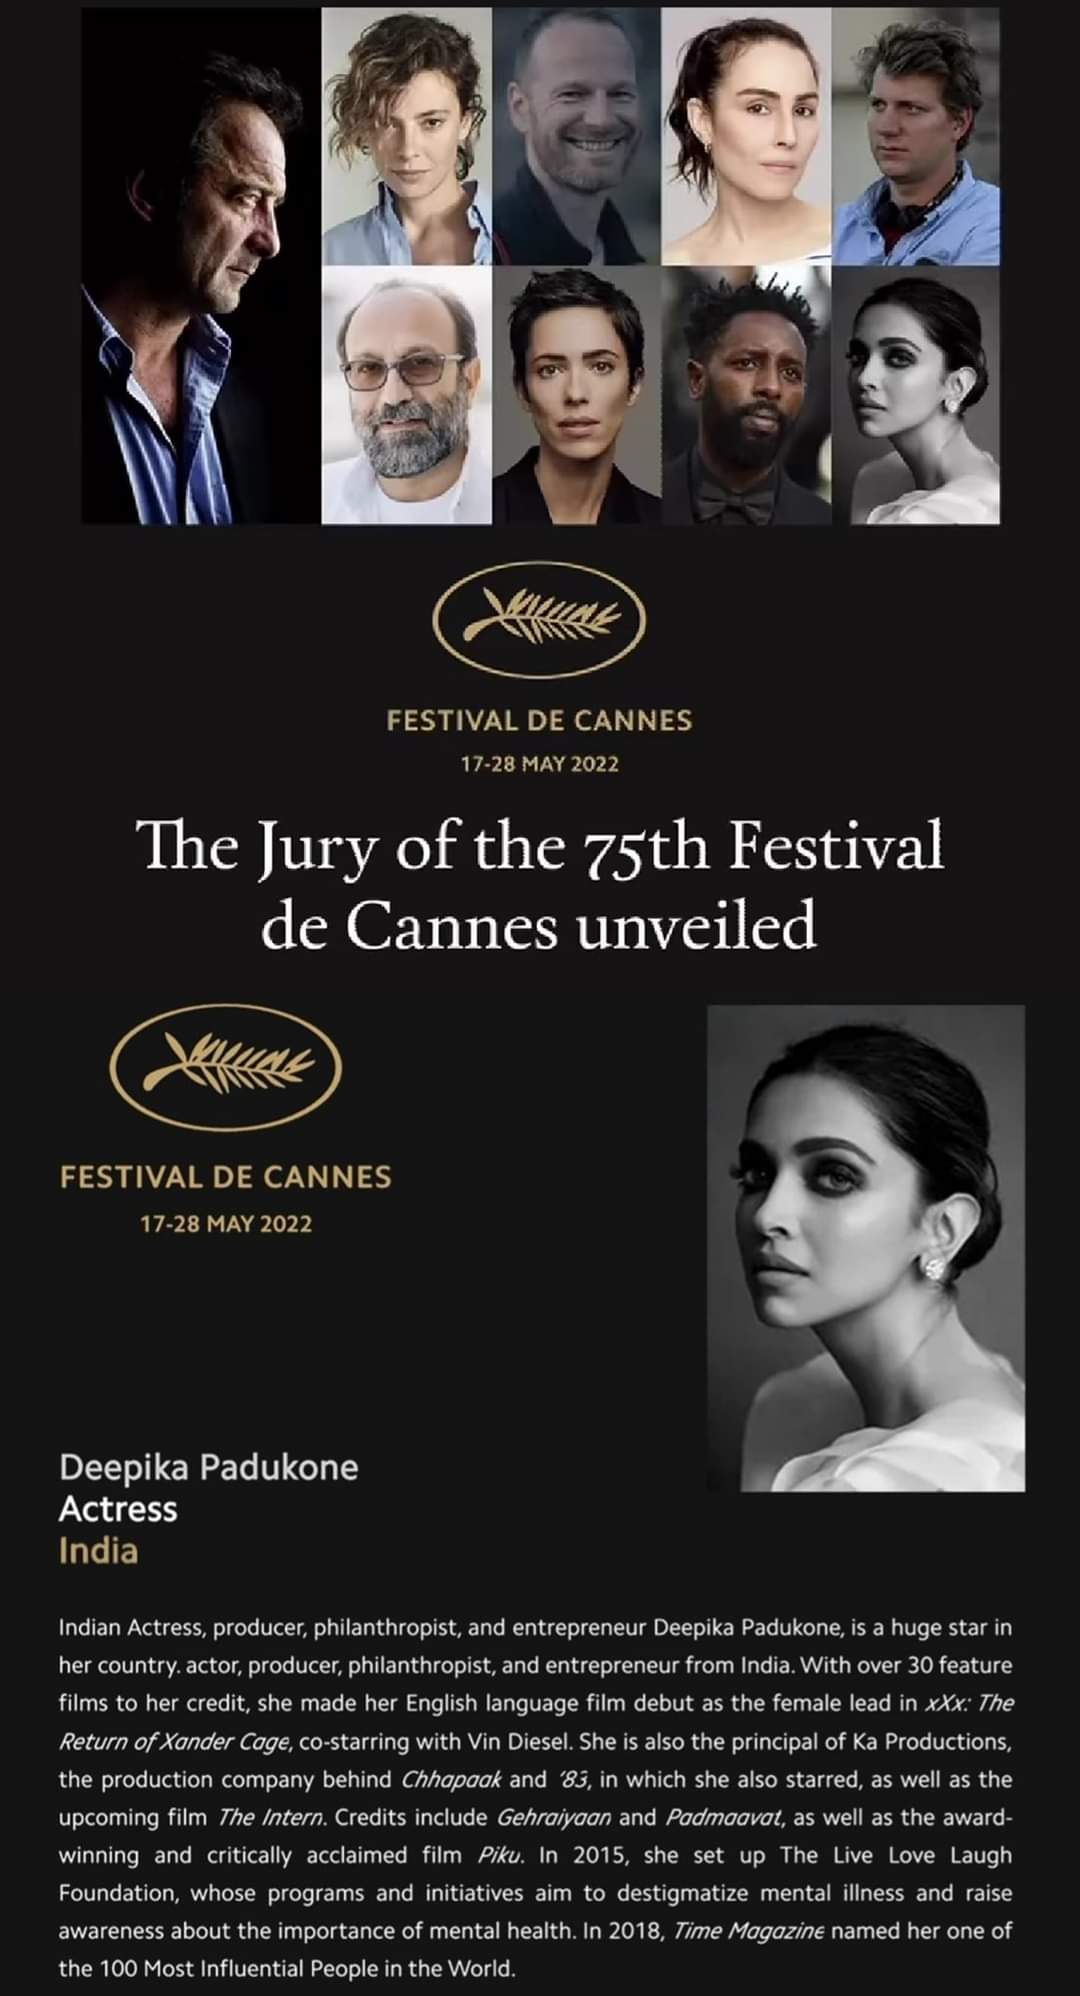 Deepika Padukone will be part of the main jury at the Cannes Film Festival